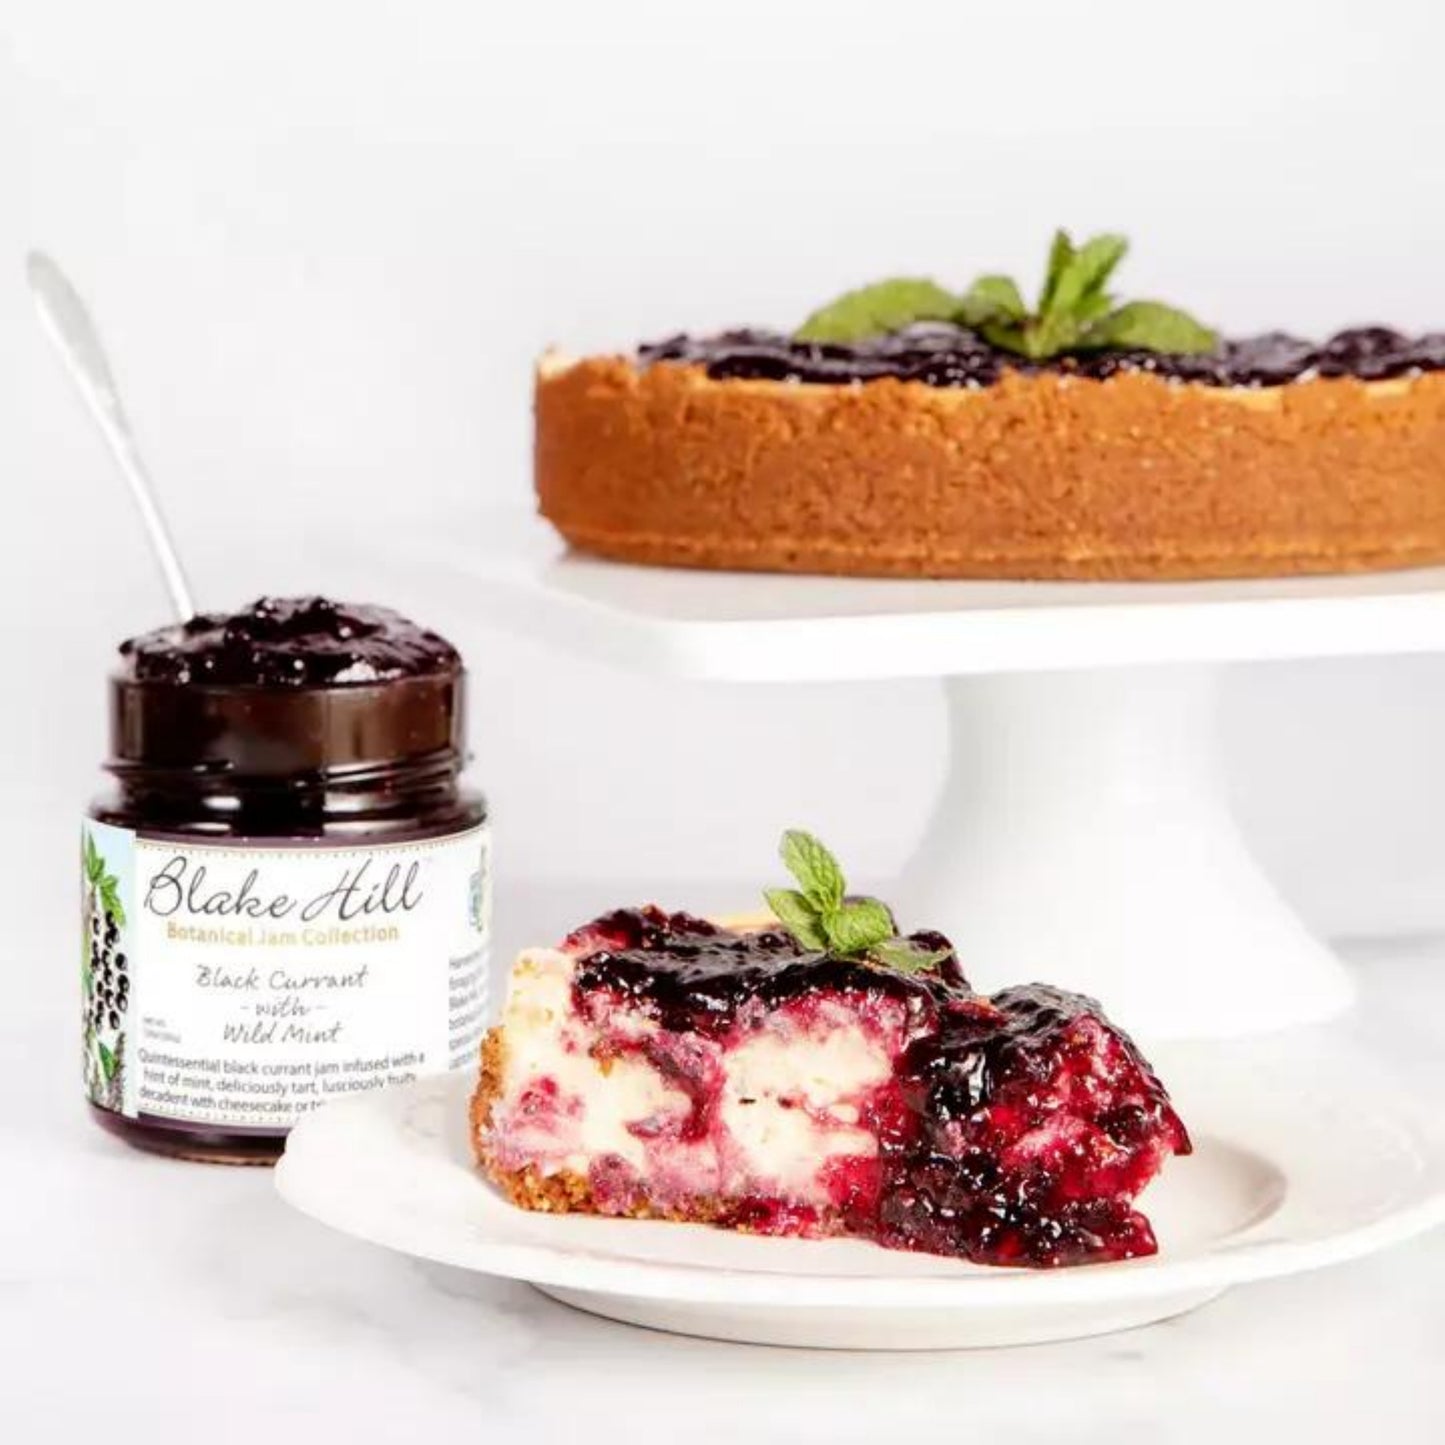 Botanical Jam Collection- Black Currant with Wild Mint Lifestyle Cheesecake